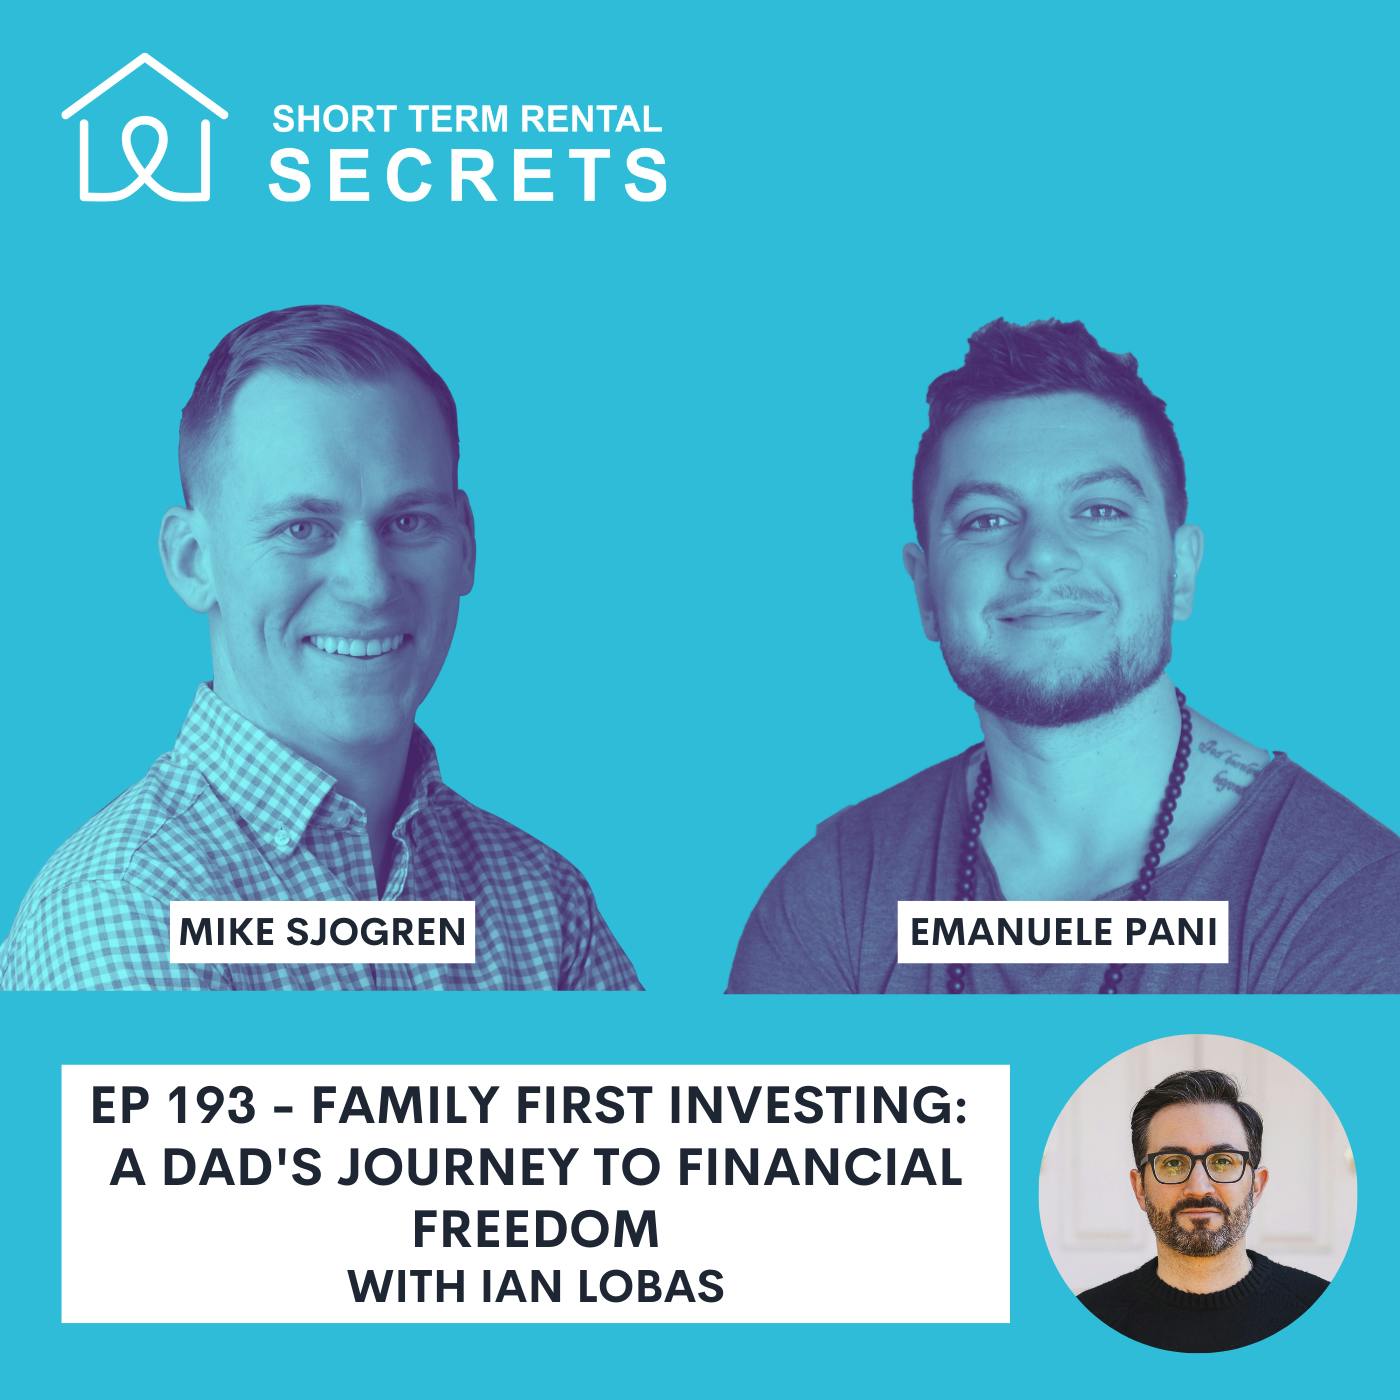 Ep 193 - Family First Investing: A Dad's Journey To Financial Freedom with Ian Lobas